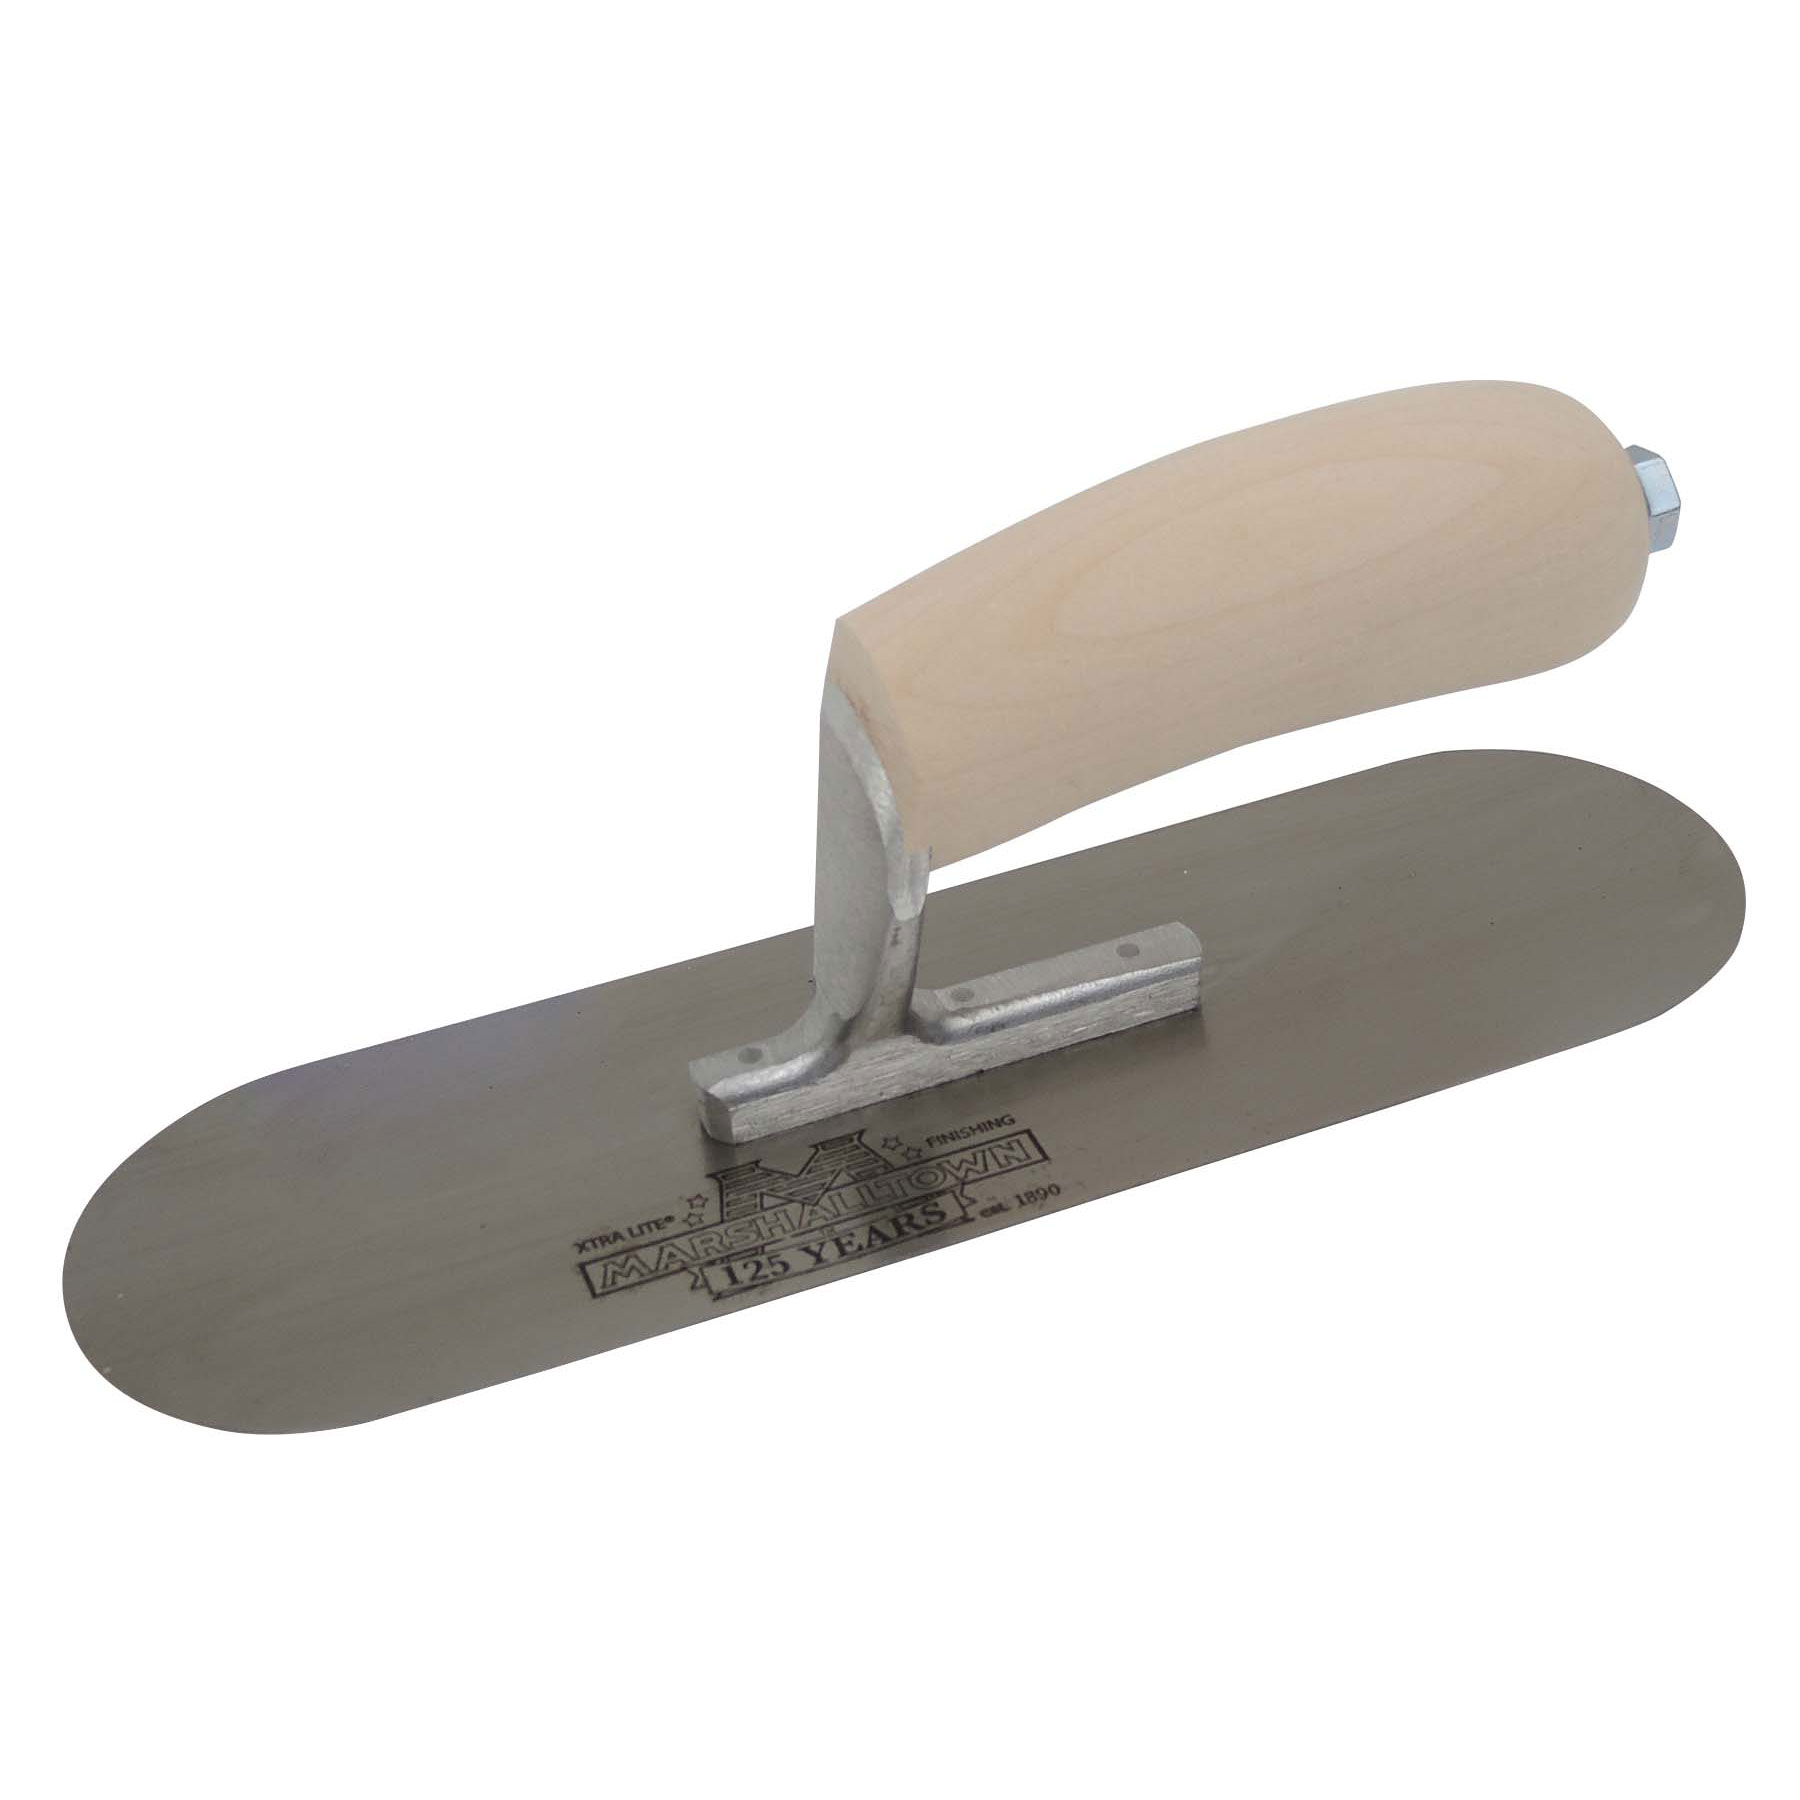 Marshalltown SP14S5 14in x 4in Pool Trowel with 5 Rivets and Wood Handle SP14S5